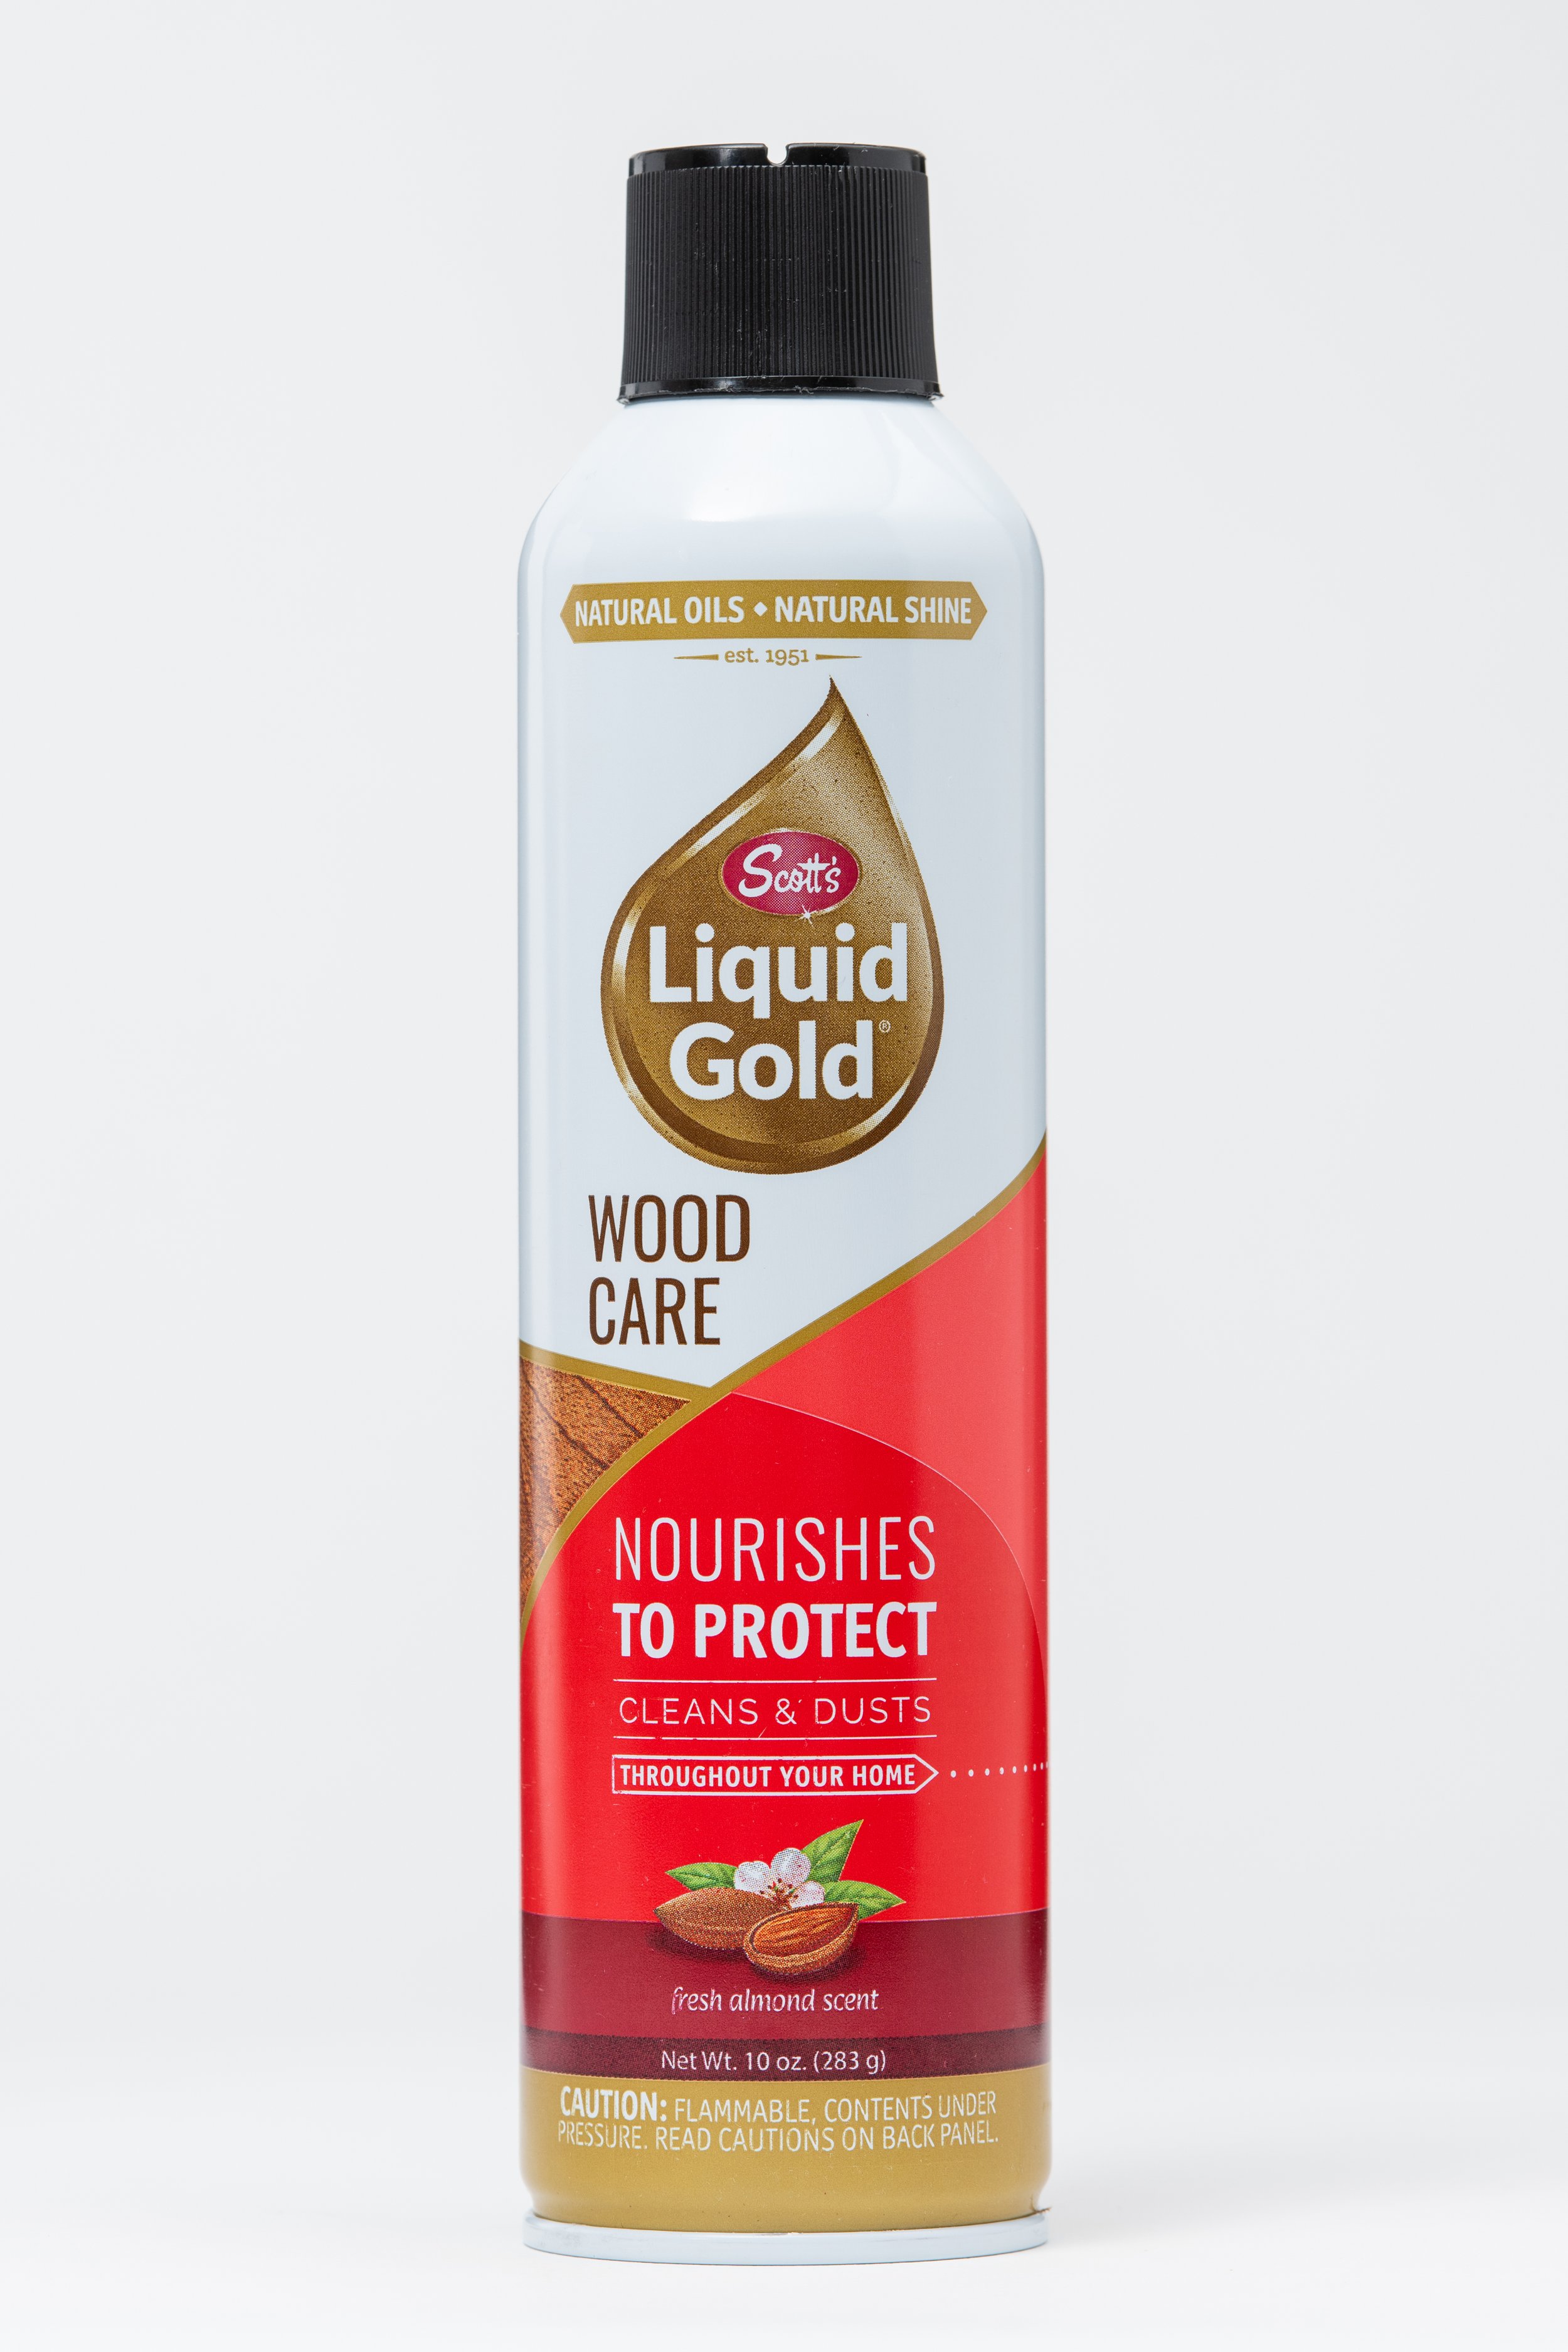 220121-knp-liquid-gold-product-0014_A copy.jpg